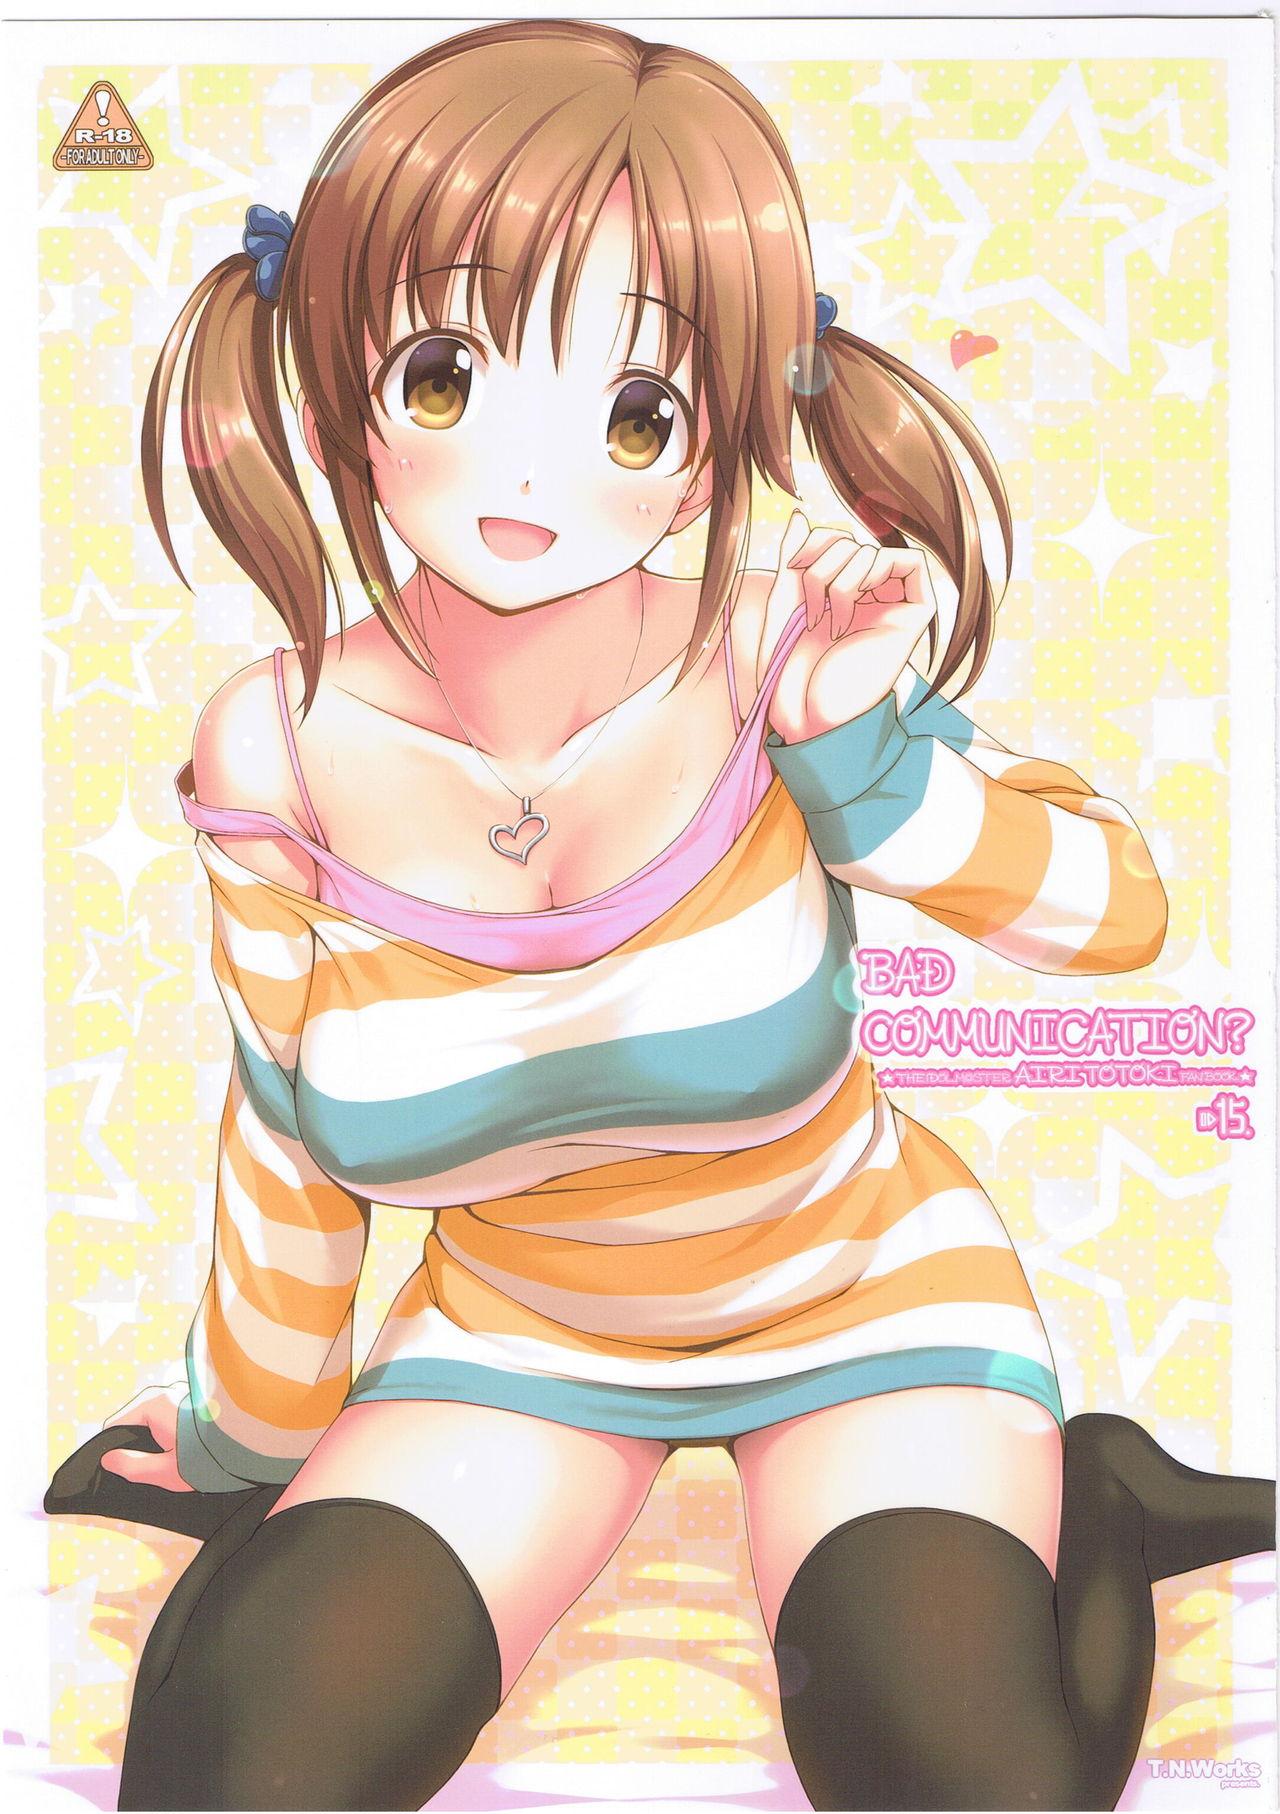 Gets BAD COMMUNICATION? 15 - The idolmaster Throat - Picture 1